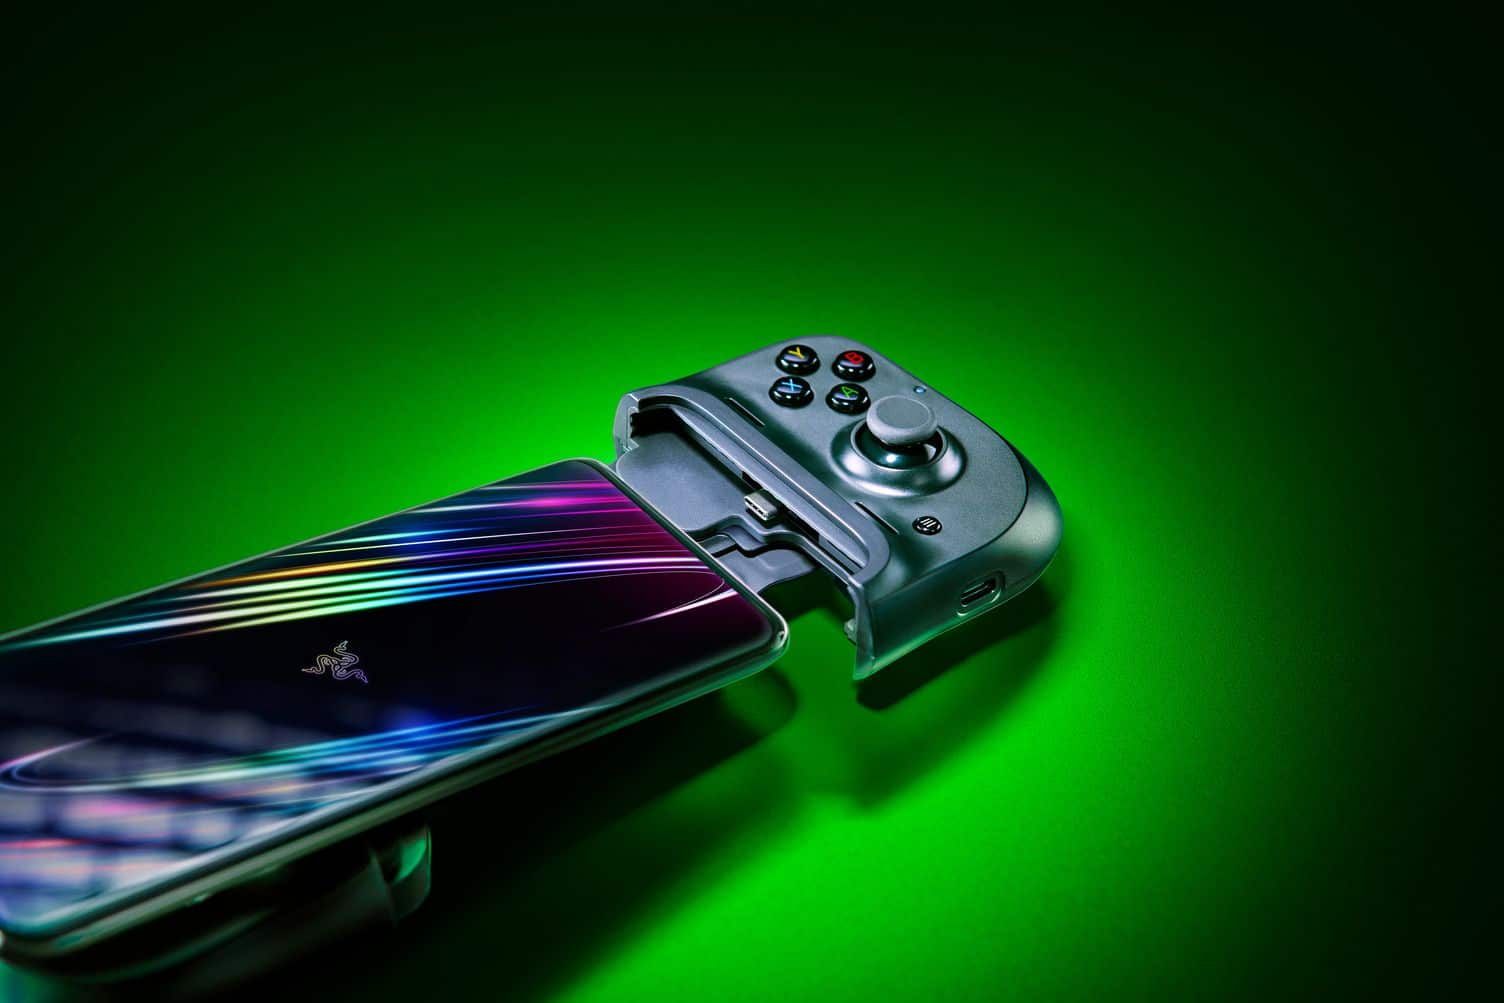 RAZER KISHI UNIVERSAL MOBILE GAMING CONTROLLER FOR ANDROID (XBOX) NOW AVAILABLE